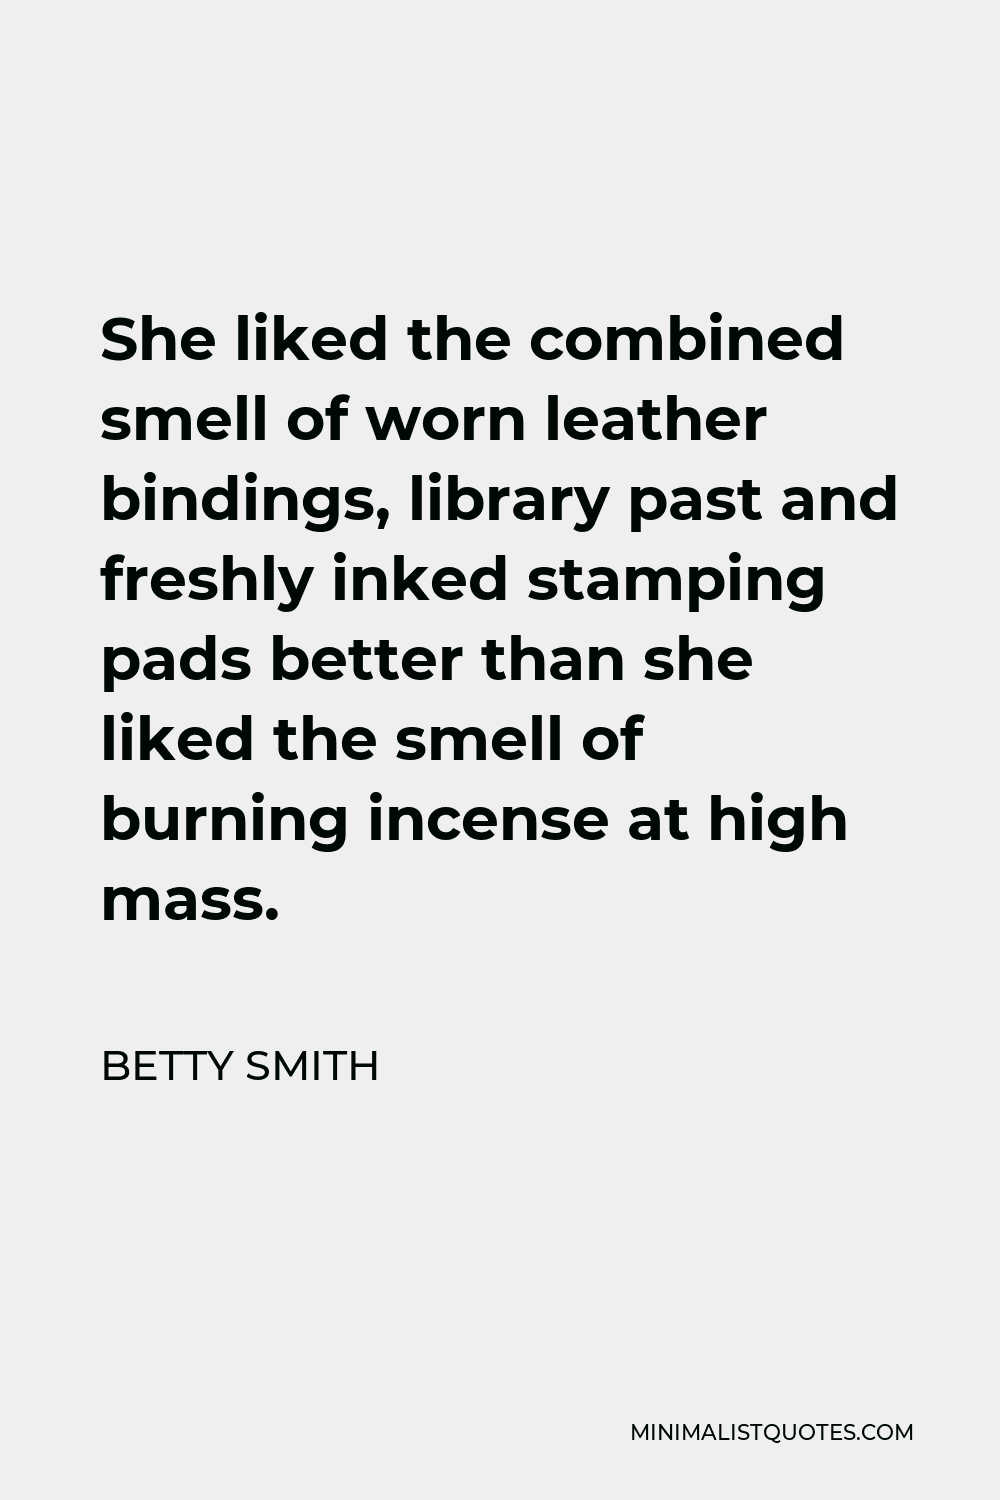 Betty Smith Quote - She liked the combined smell of worn leather bindings, library past and freshly inked stamping pads better than she liked the smell of burning incense at high mass.